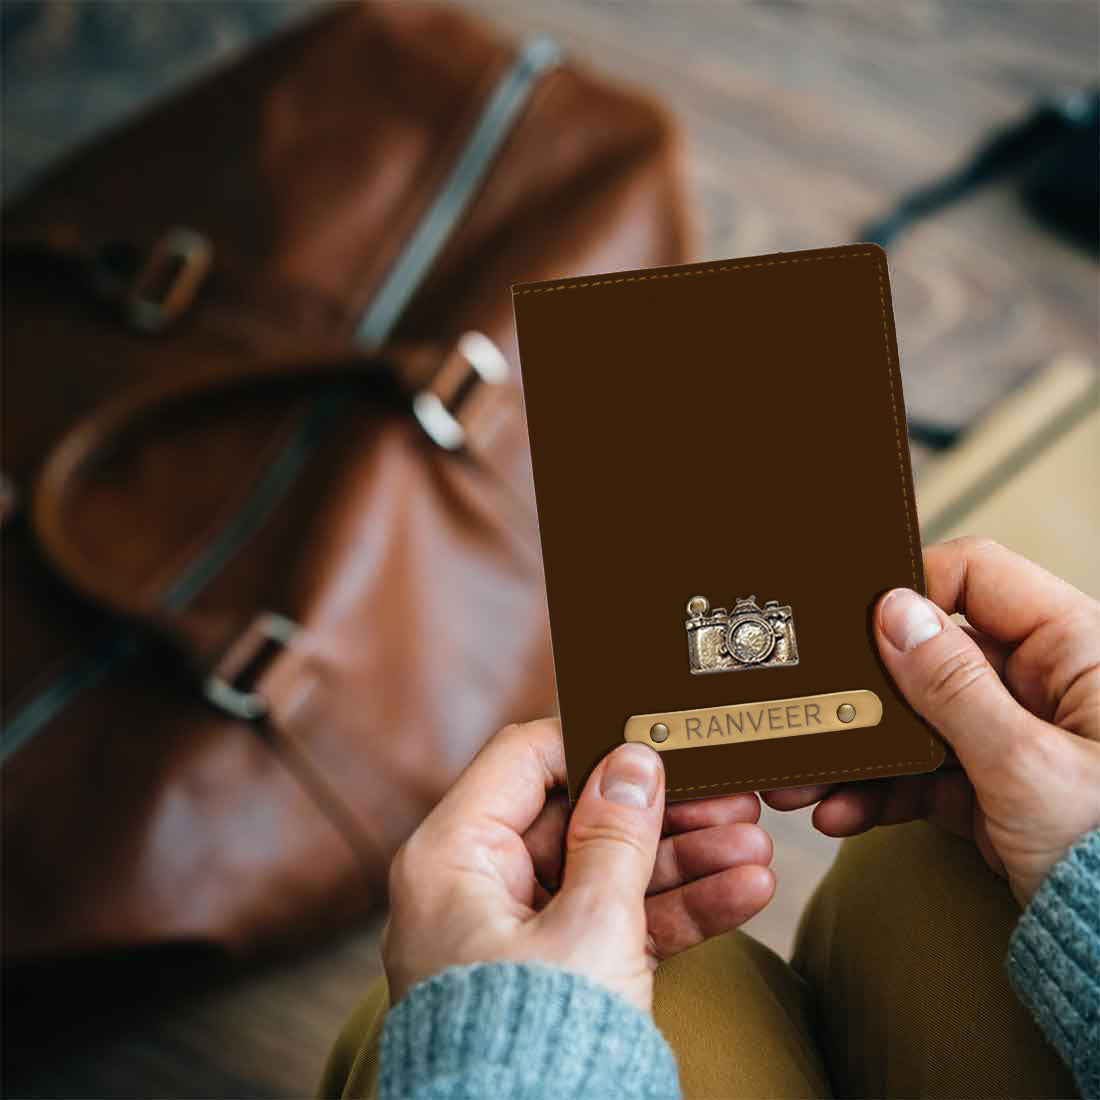 Customized Travel Wallet Passport Cover with Charm - Camera